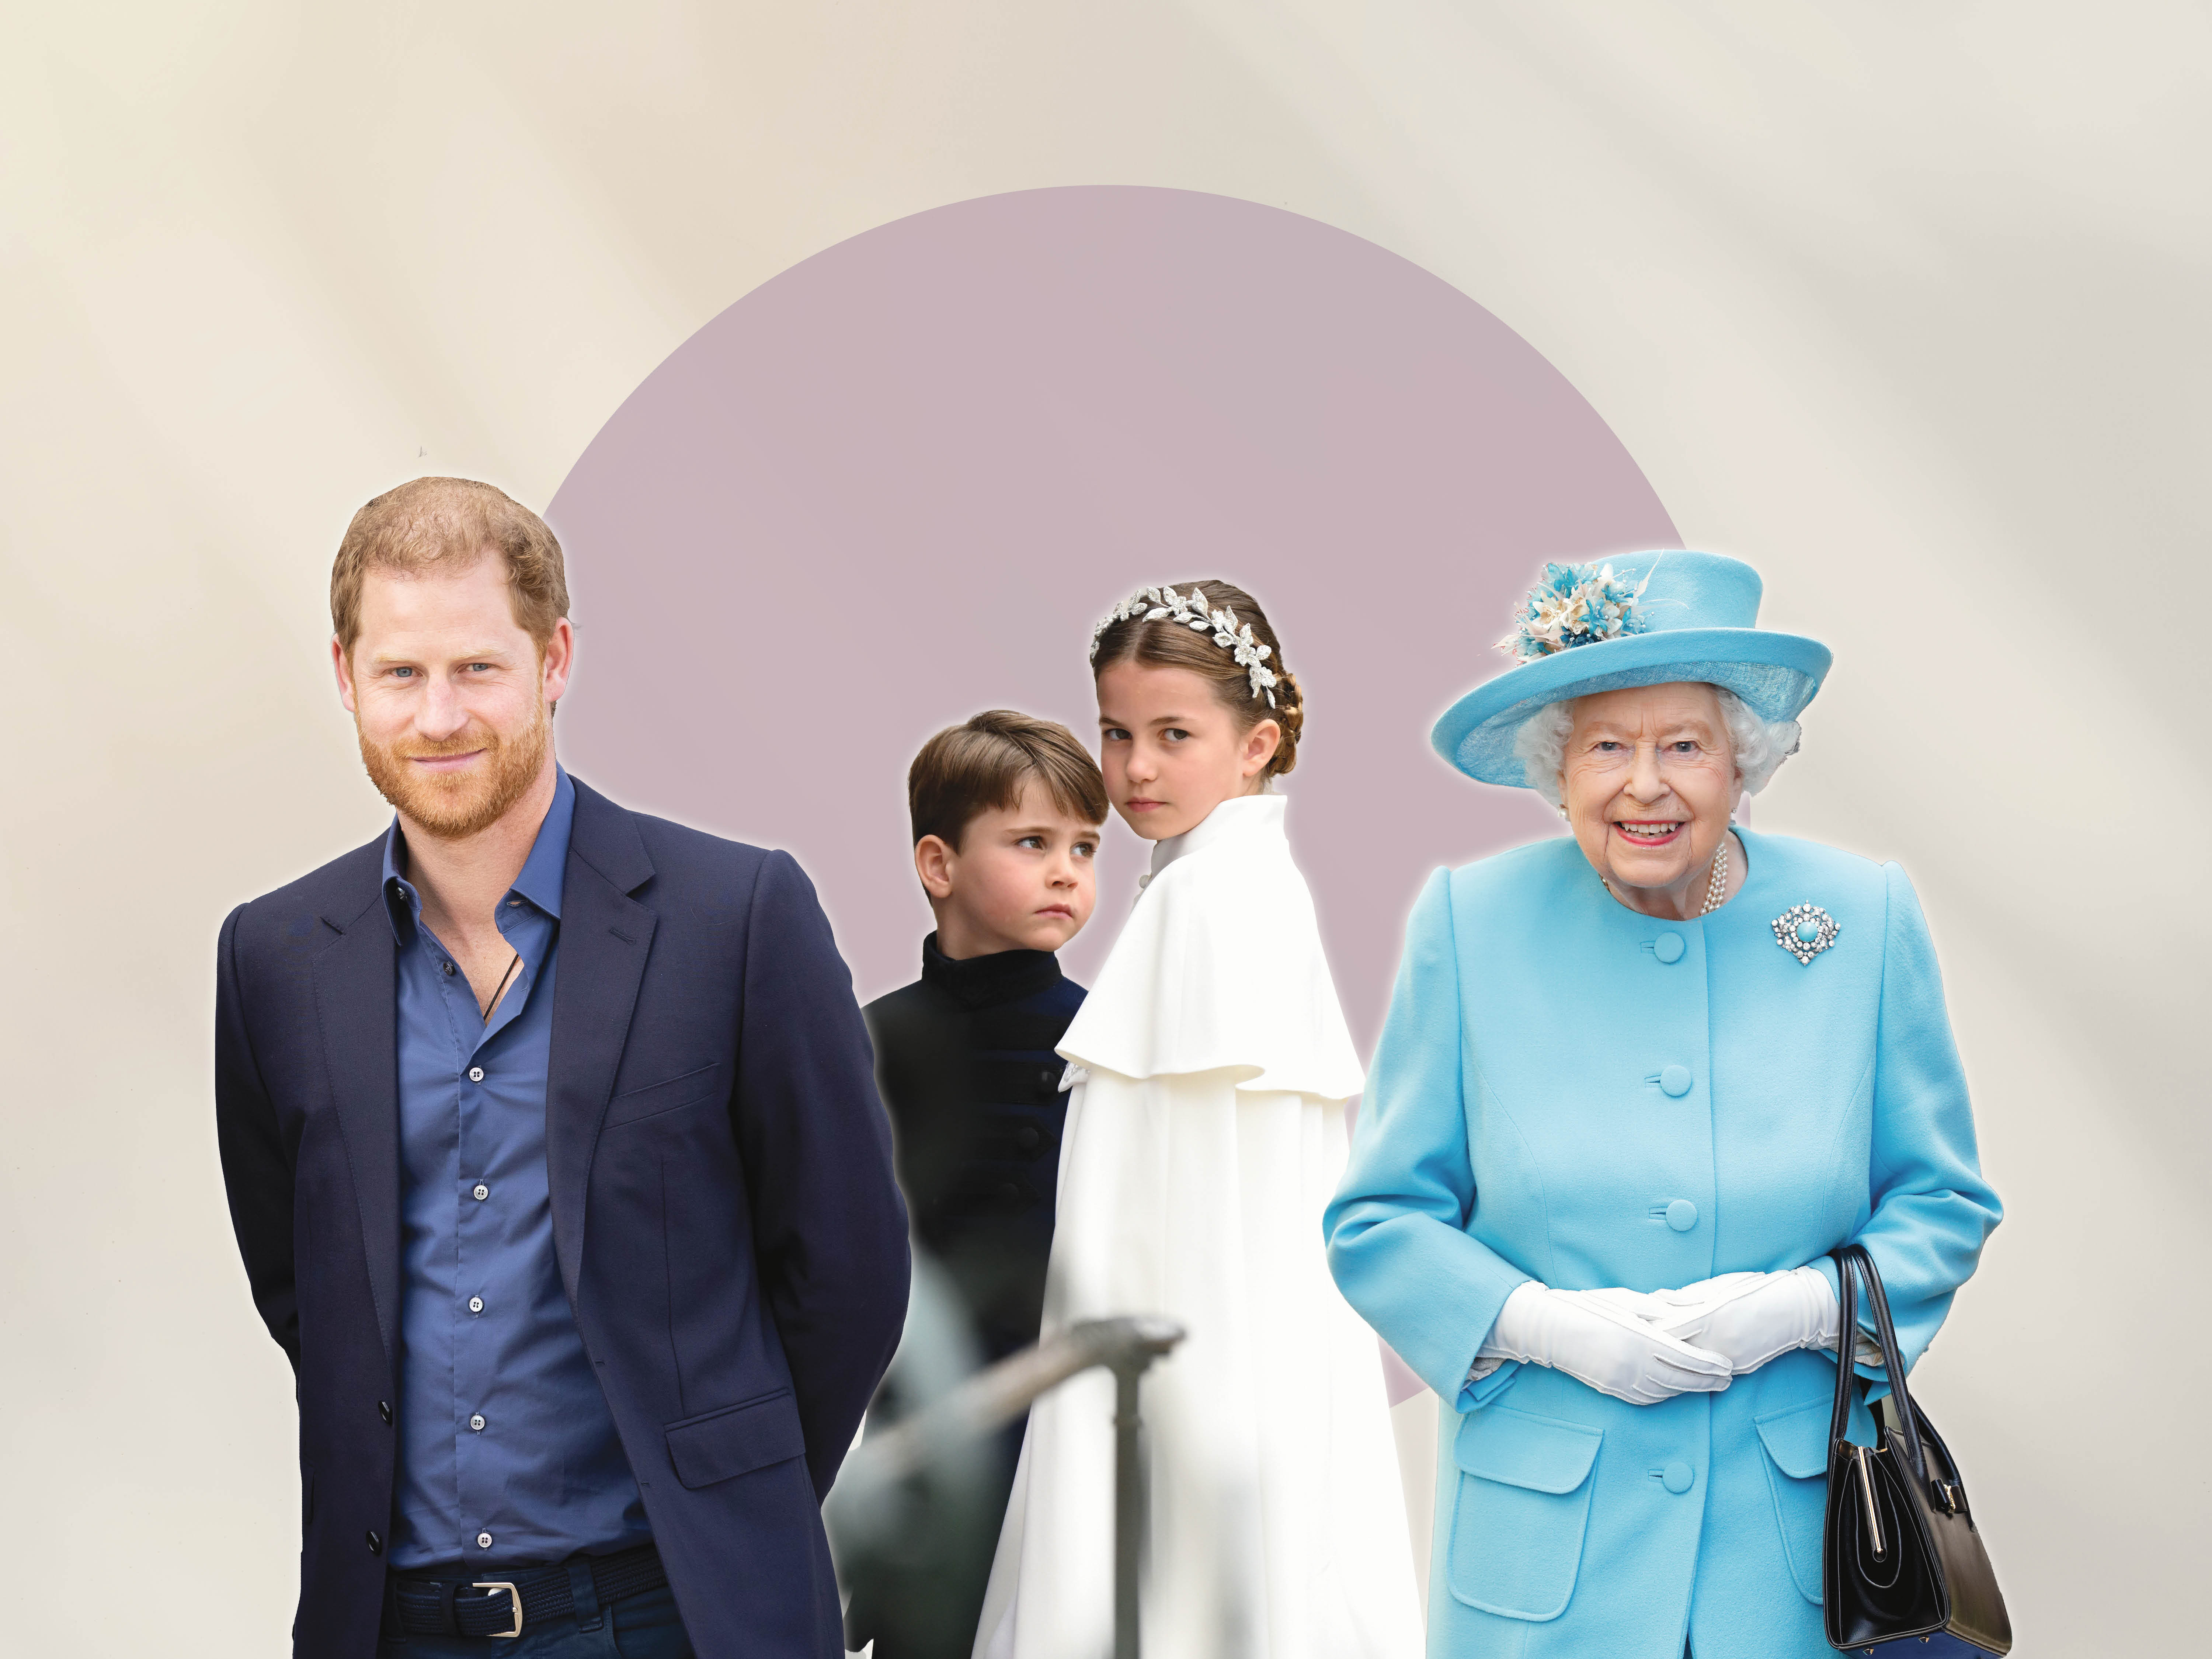 Endearing Nicknames the Royal Family Has For One Another